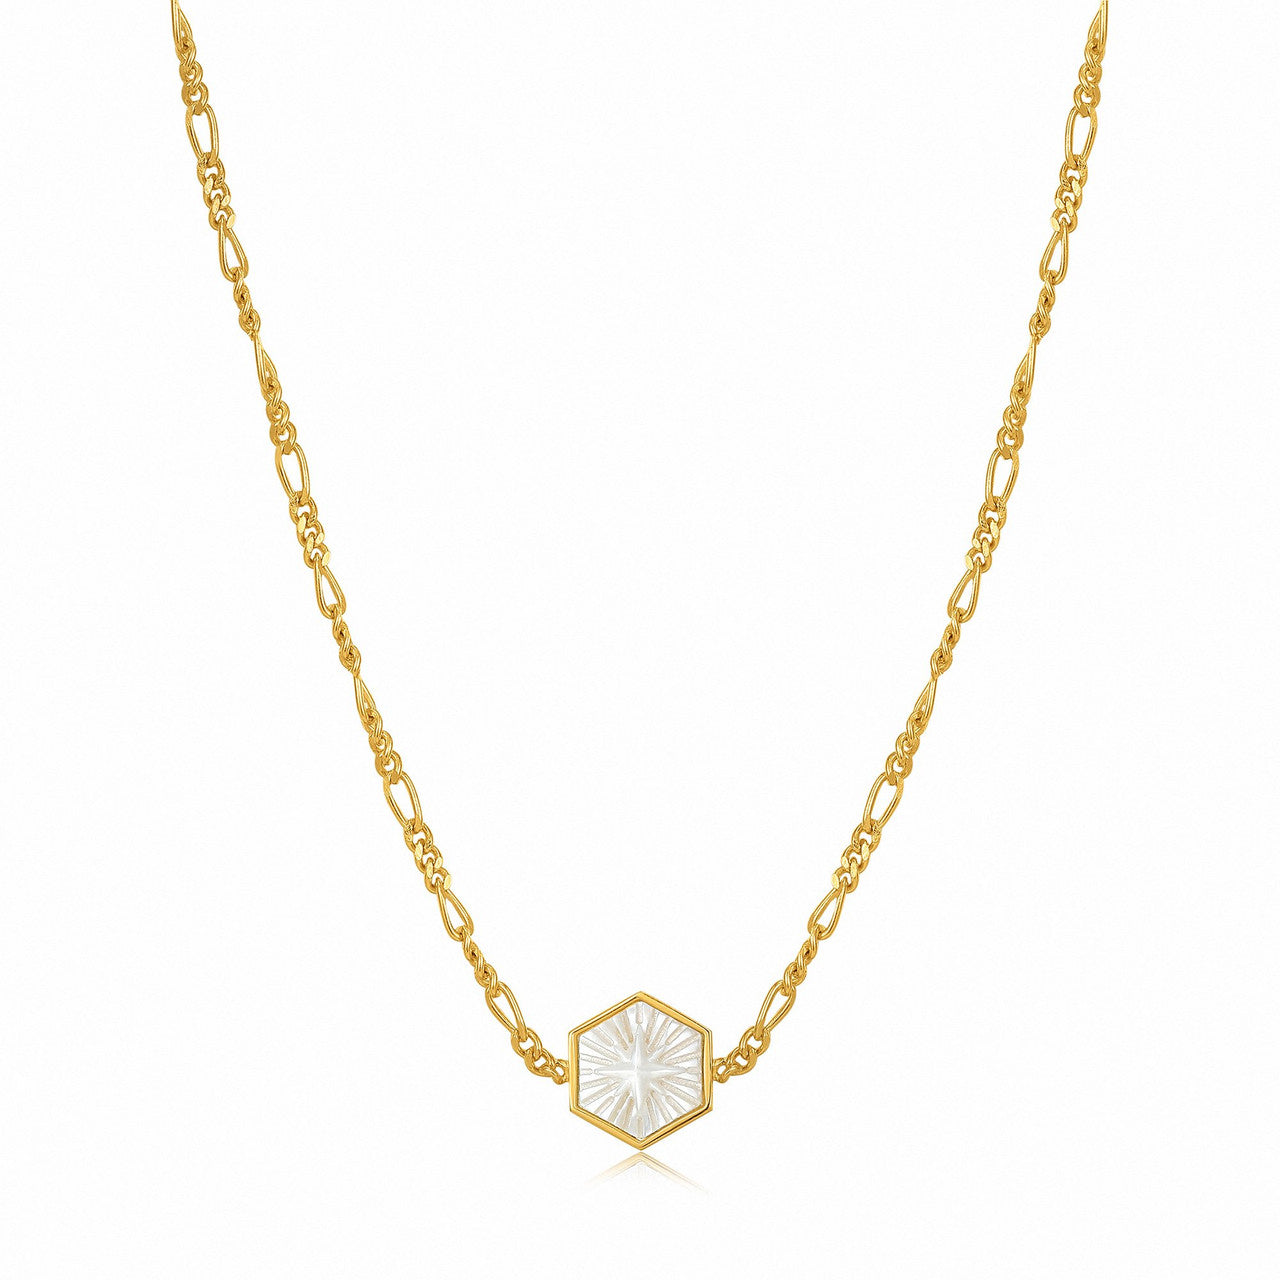 Ania Haie Compass Emblem Gold Figaro Chain Necklace - N030-04G | Ice Jewellery Australia